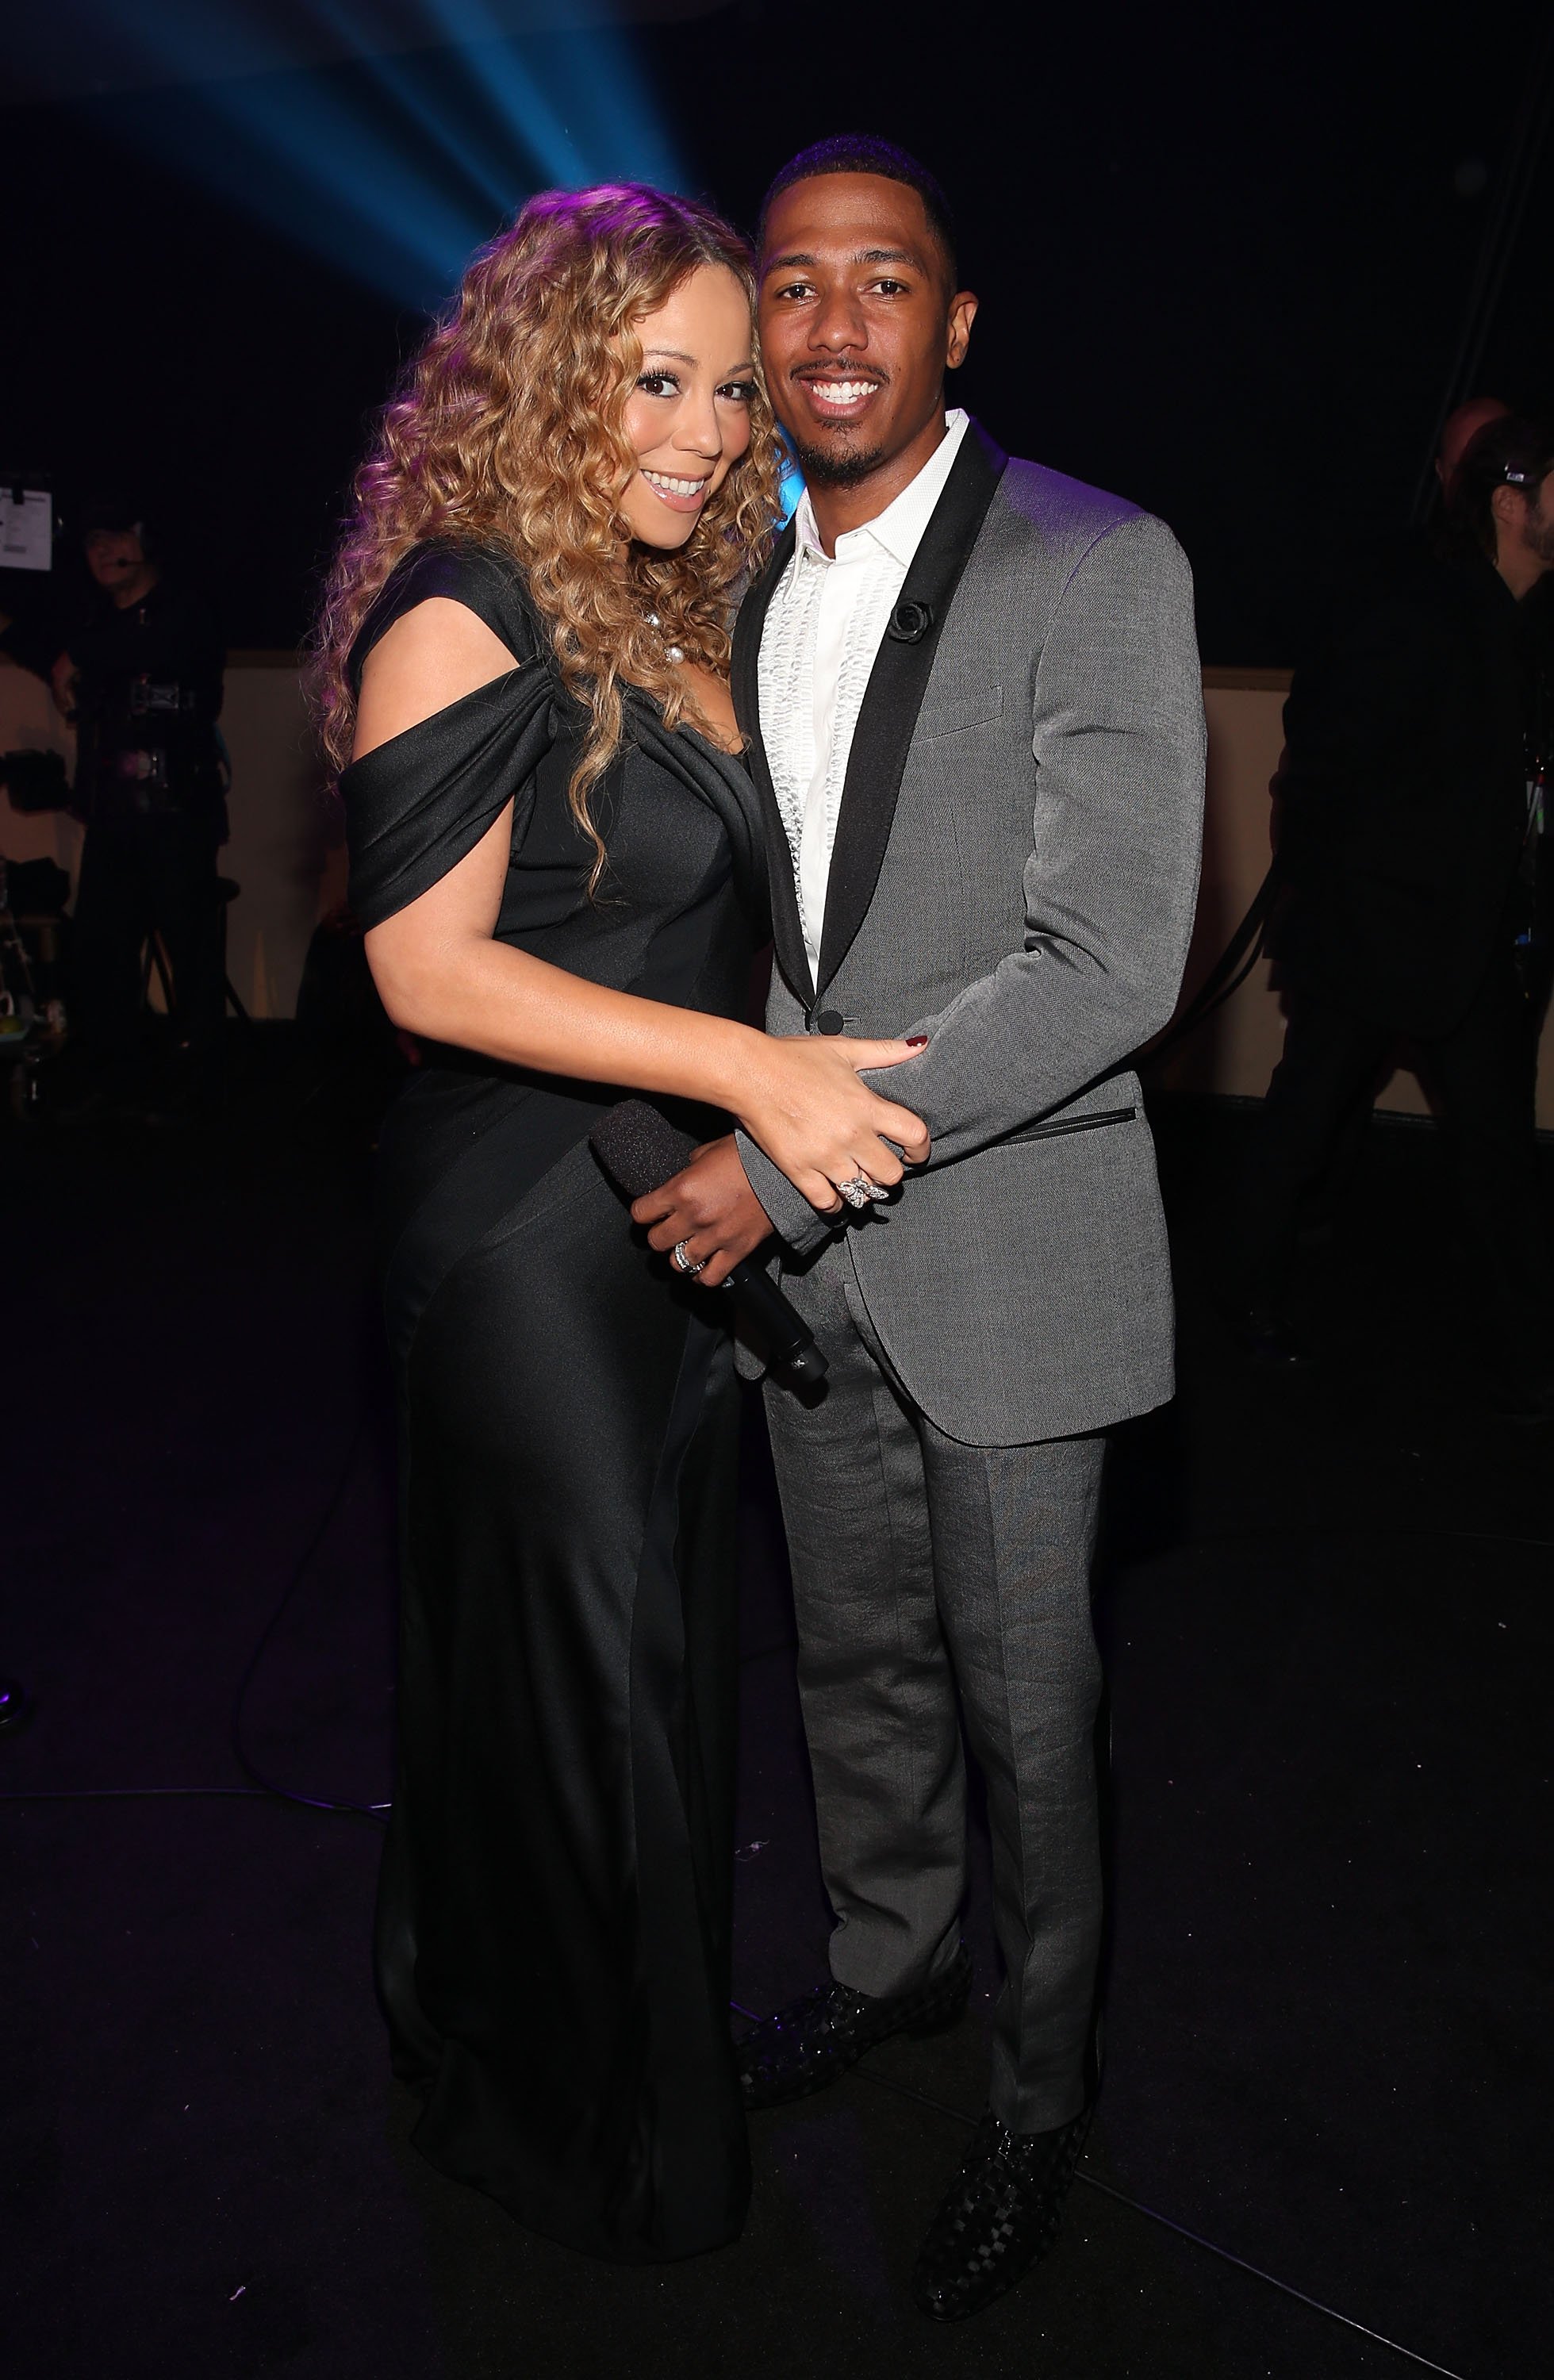 Former spouses Nick Cannon and Mariah Carey at Nickelodeon's 2012 TeenNick HALO Awards in Hollywood in November 2012. | Photo: Getty Images